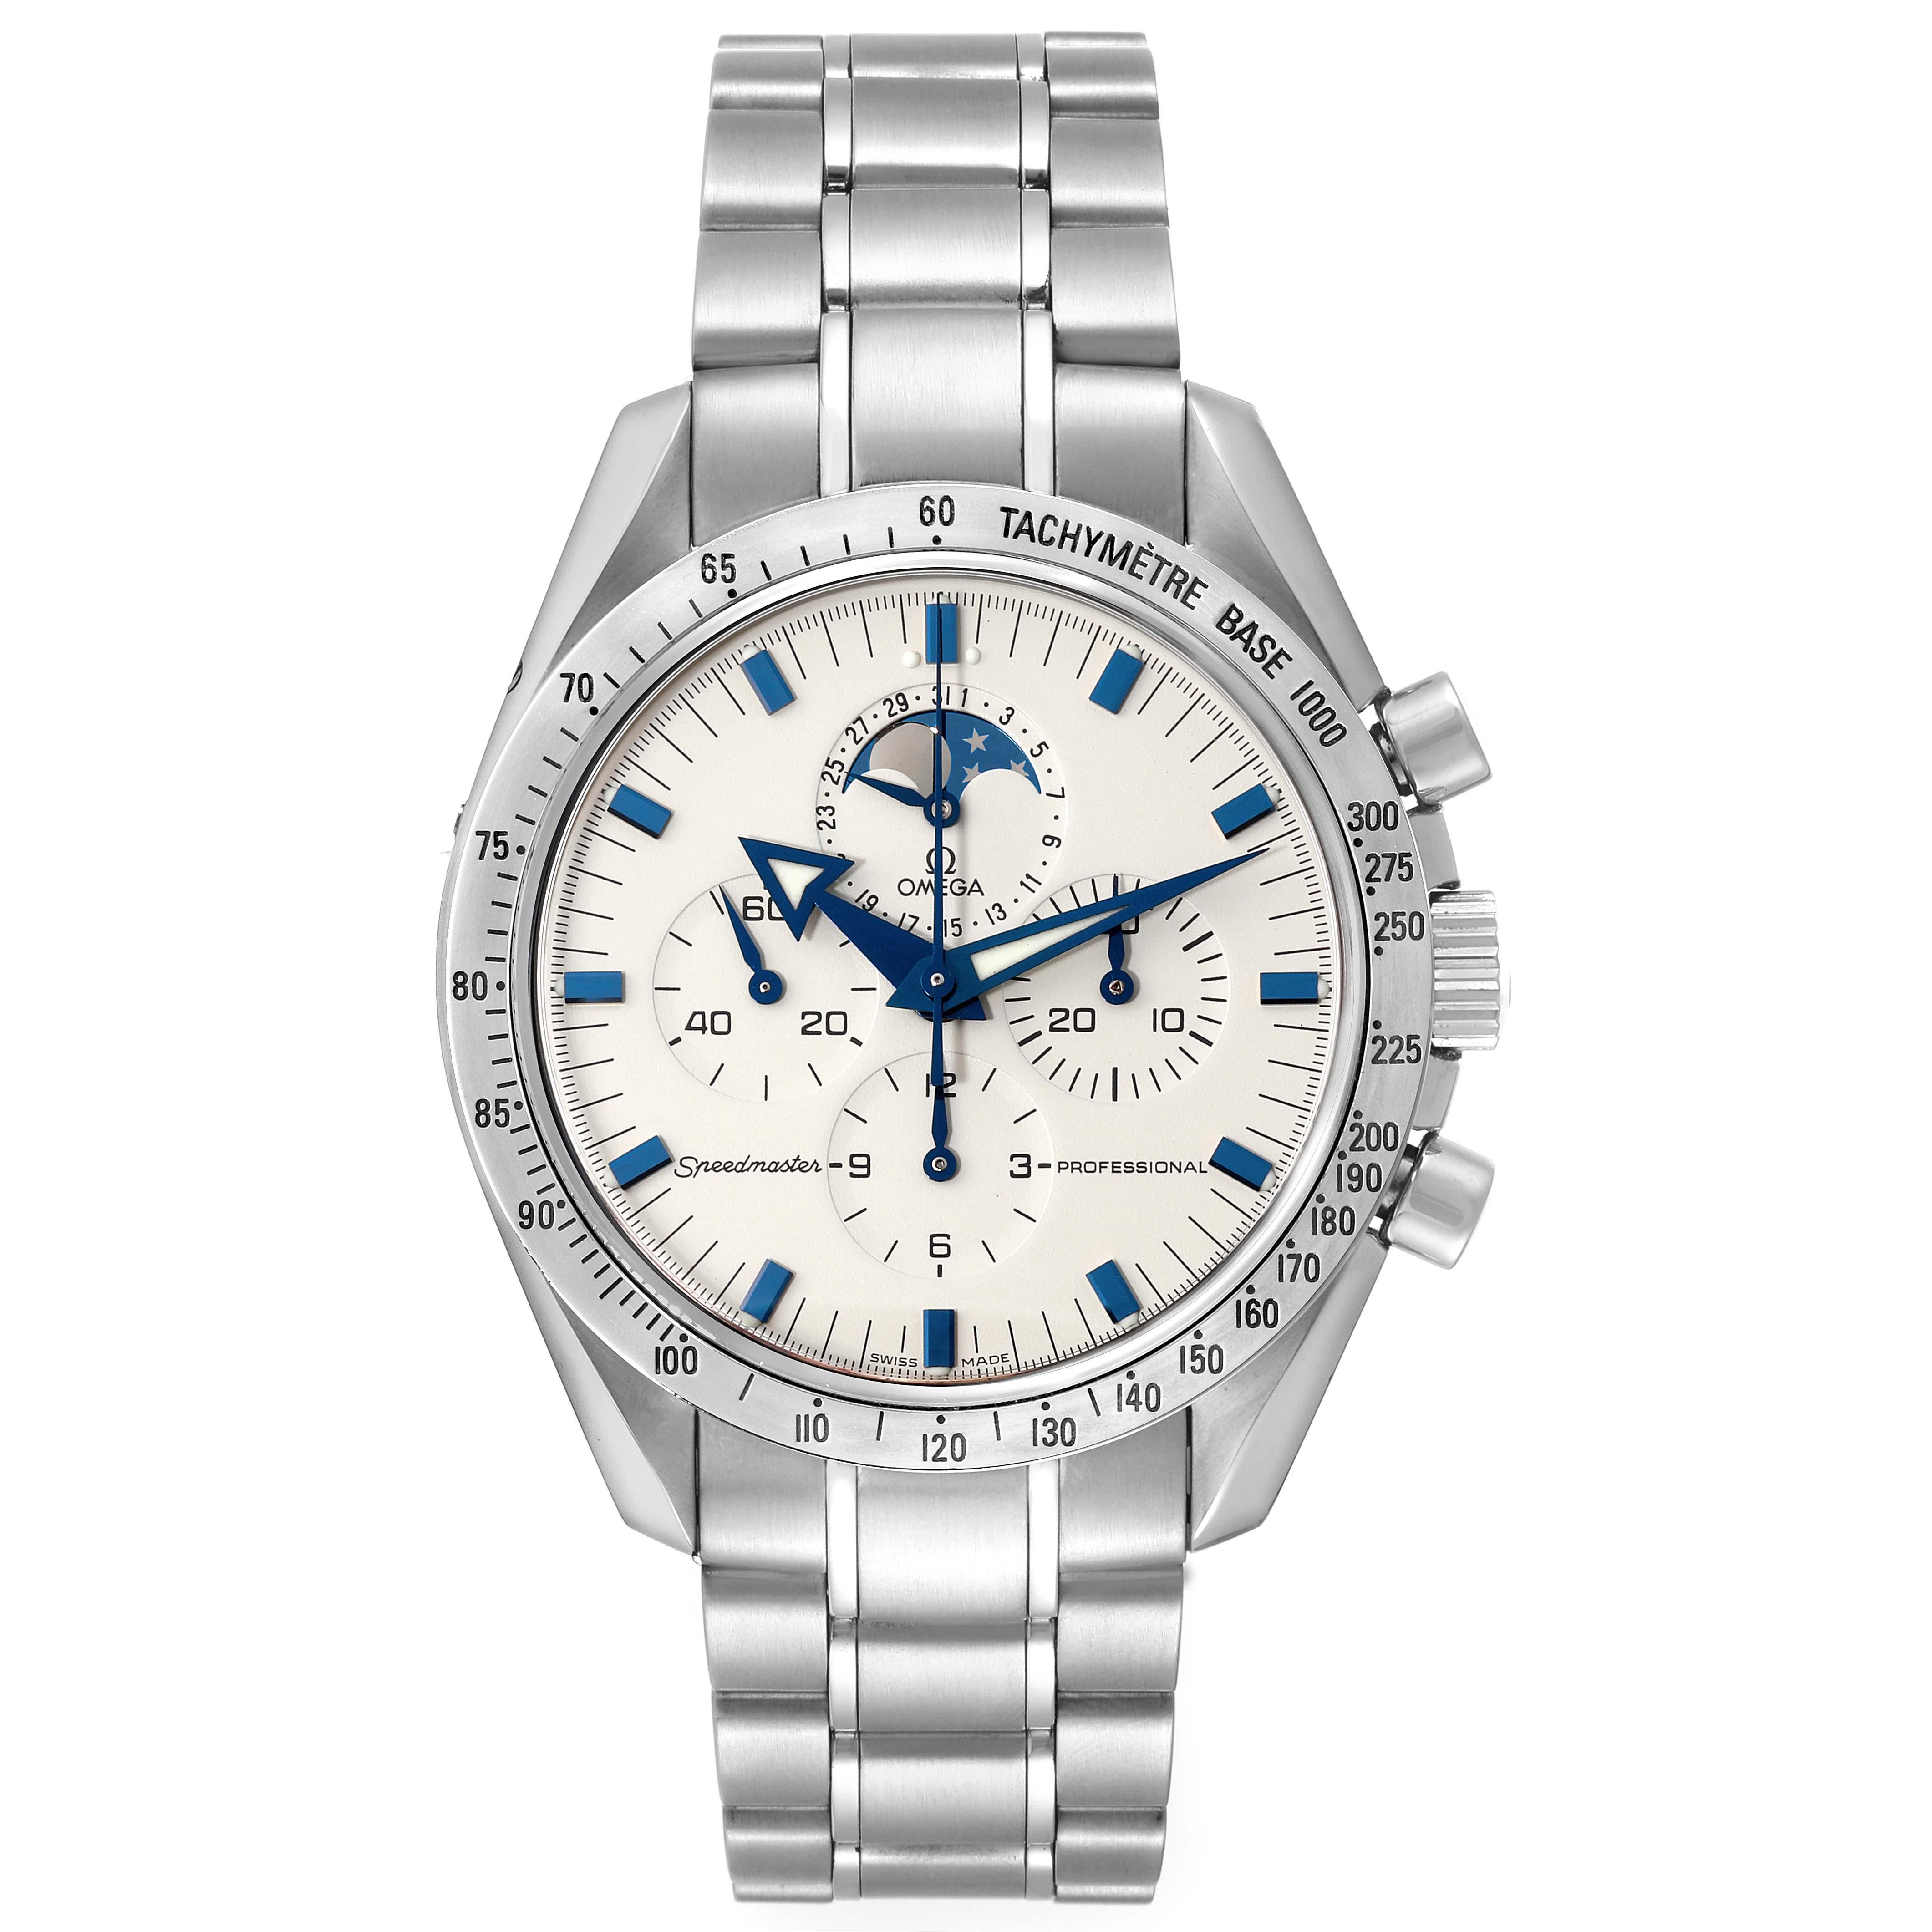 Omega Speedmaster Moon Phase Chronograph Steel Mens Watch 3575.20.00 Box Card. Manual-winding chronograph movement. Caliber 1861. Stainless steel round case 42 mm in diameter. Stainless steel bezel with tachymetre function. Scratch-resistant